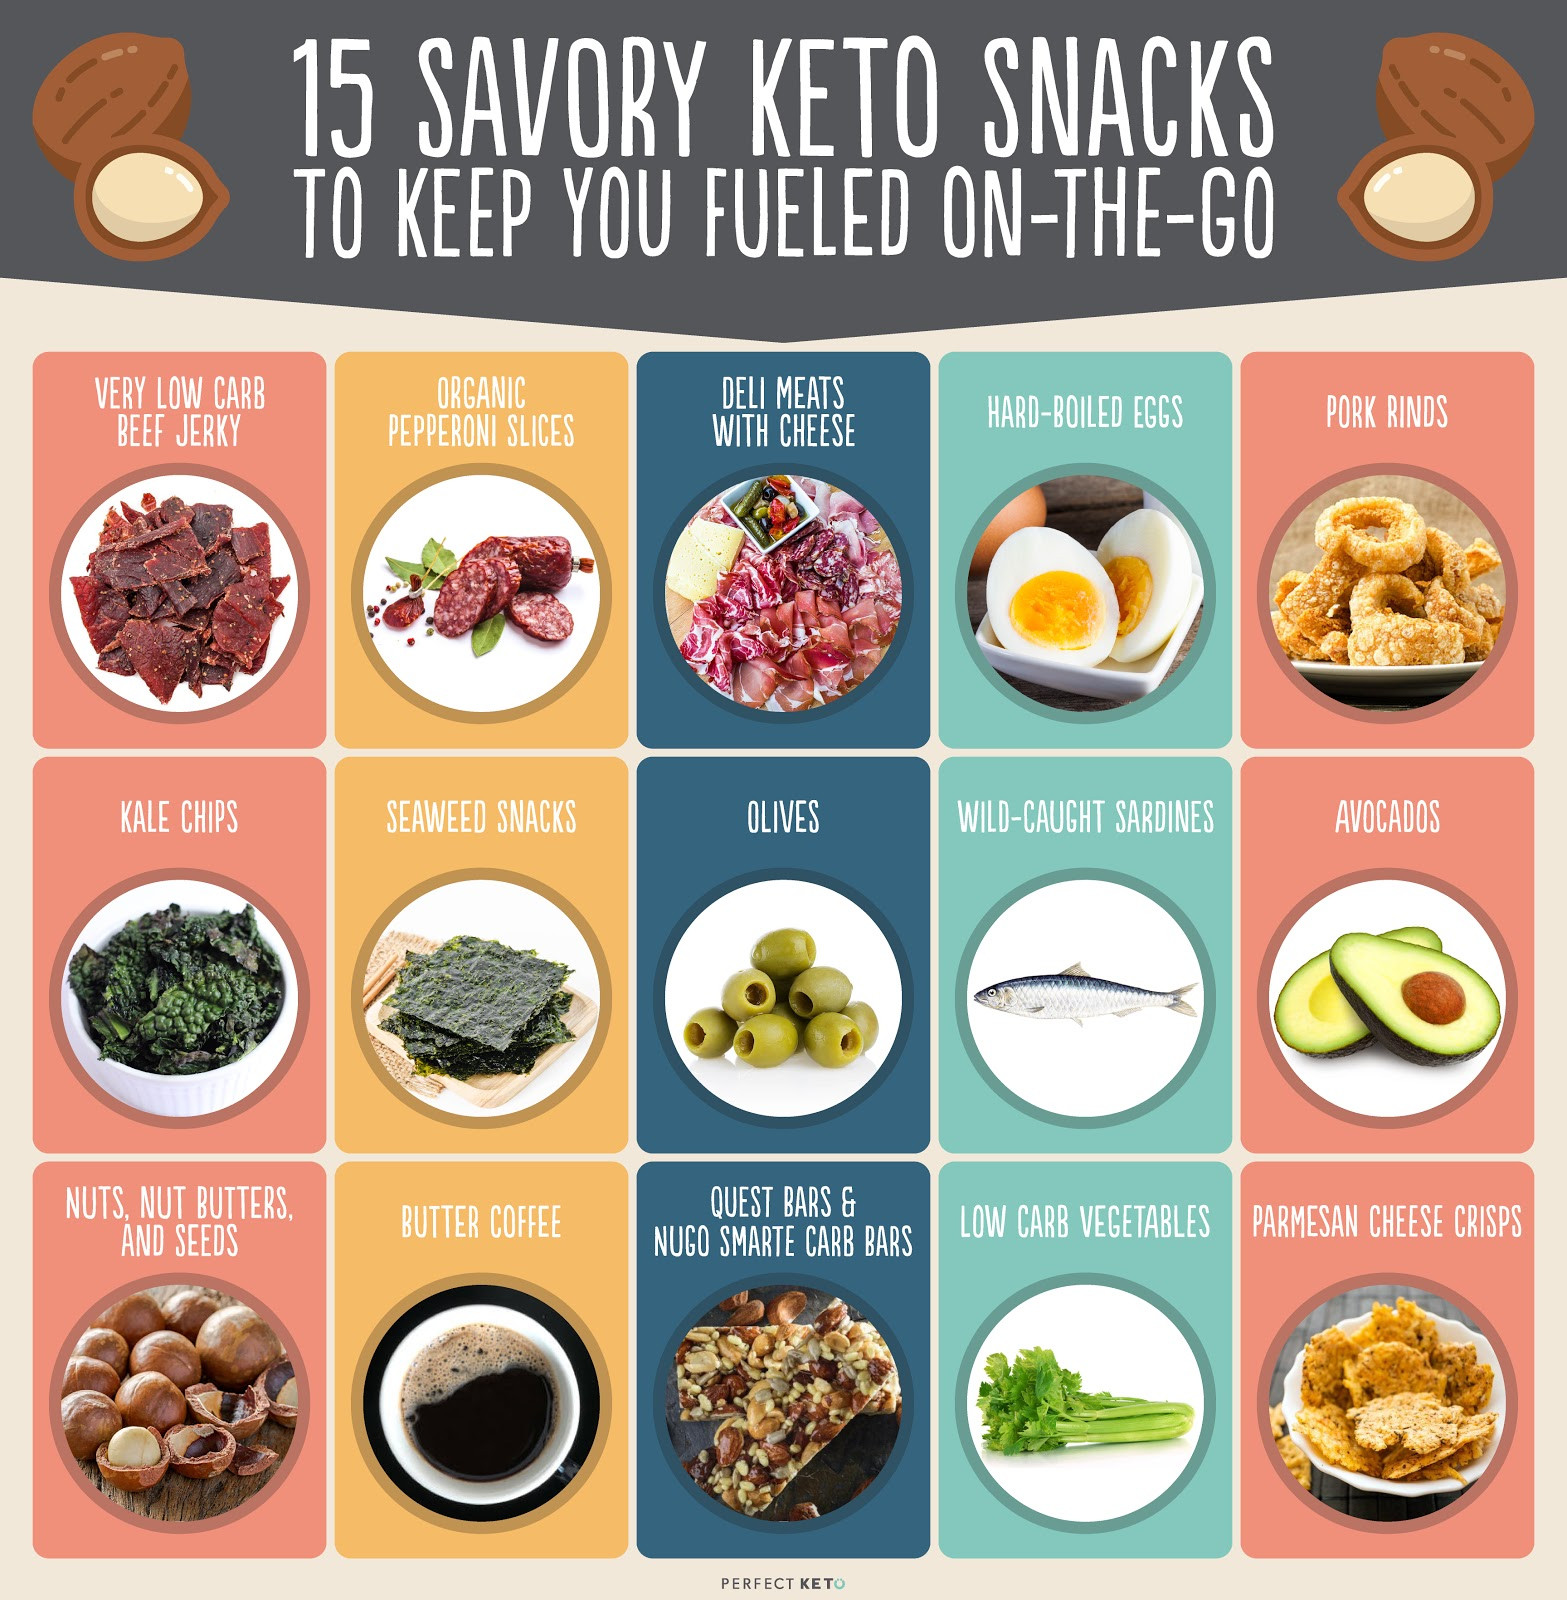 Keto Diet Snacks To Buy
 20 Best Store Bought Keto Snacks Reviews and Guide